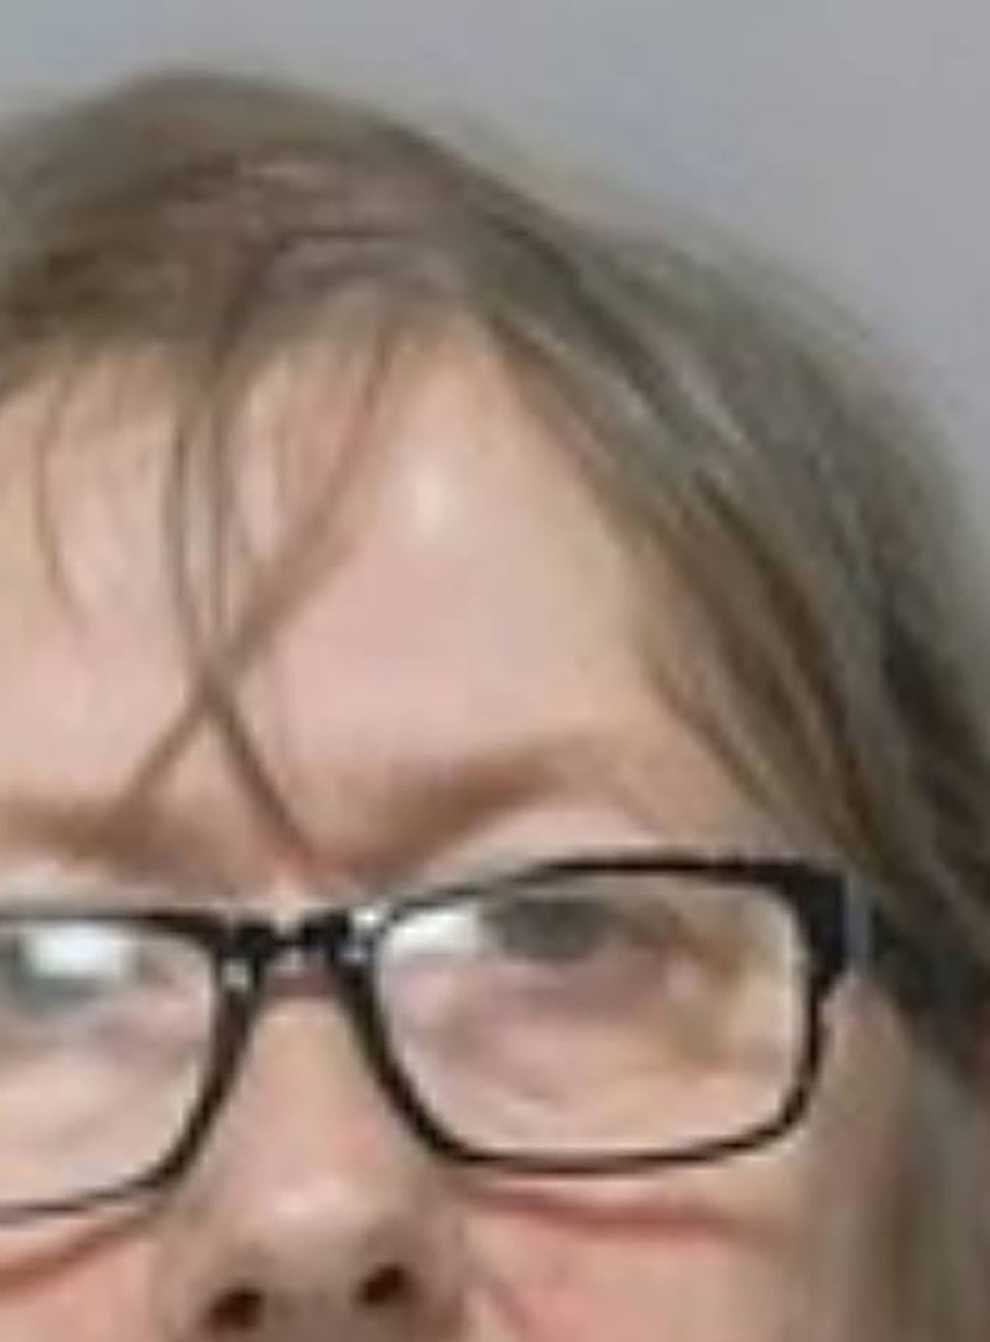 Sally Ann Dixon, of Swanmore Avenue, Havant, Hants, who was jailed for 20 years having been convicted of 30 indecent assaults (Sussex Police/PA)